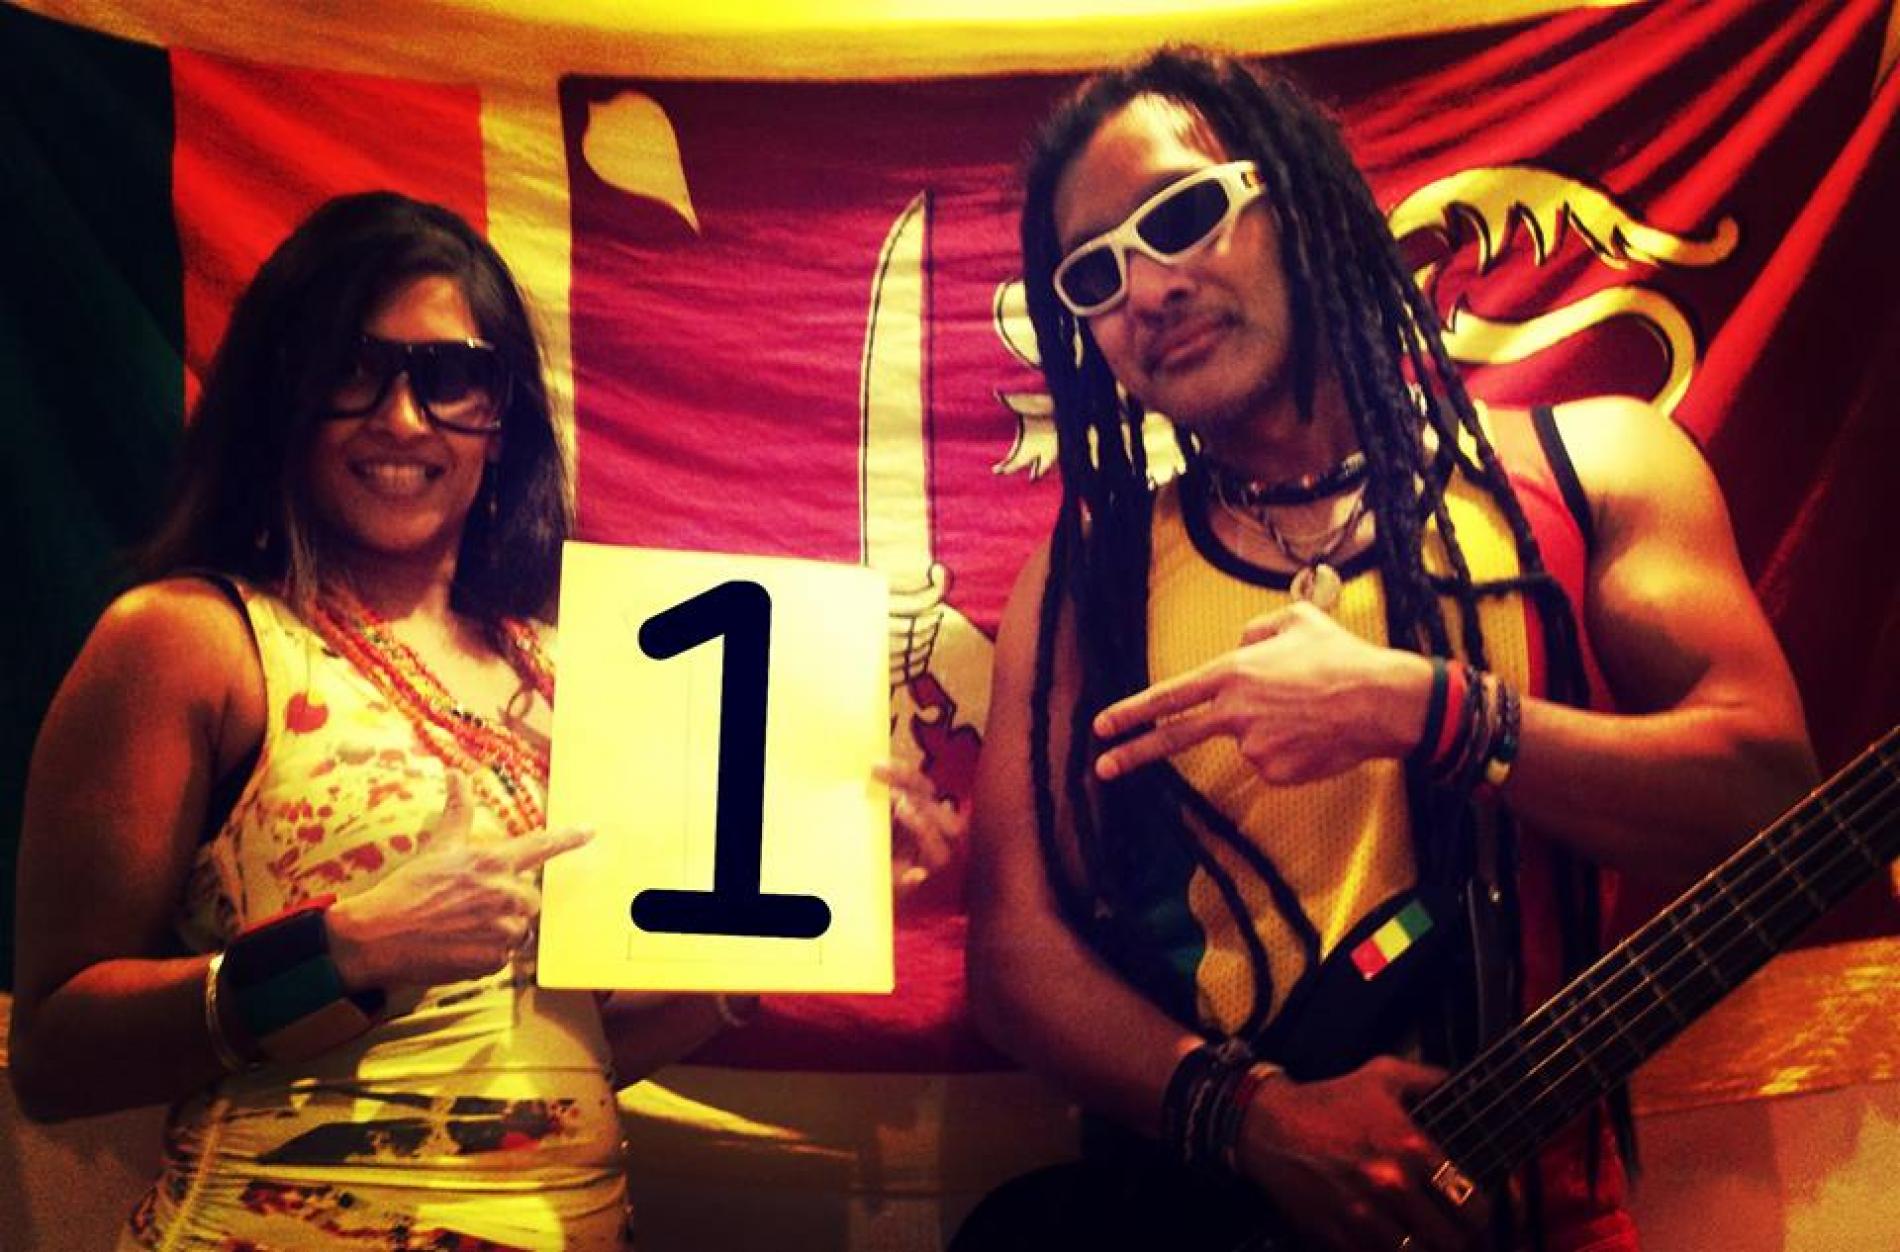 Congratz To Irie On Their 1st Number 1!